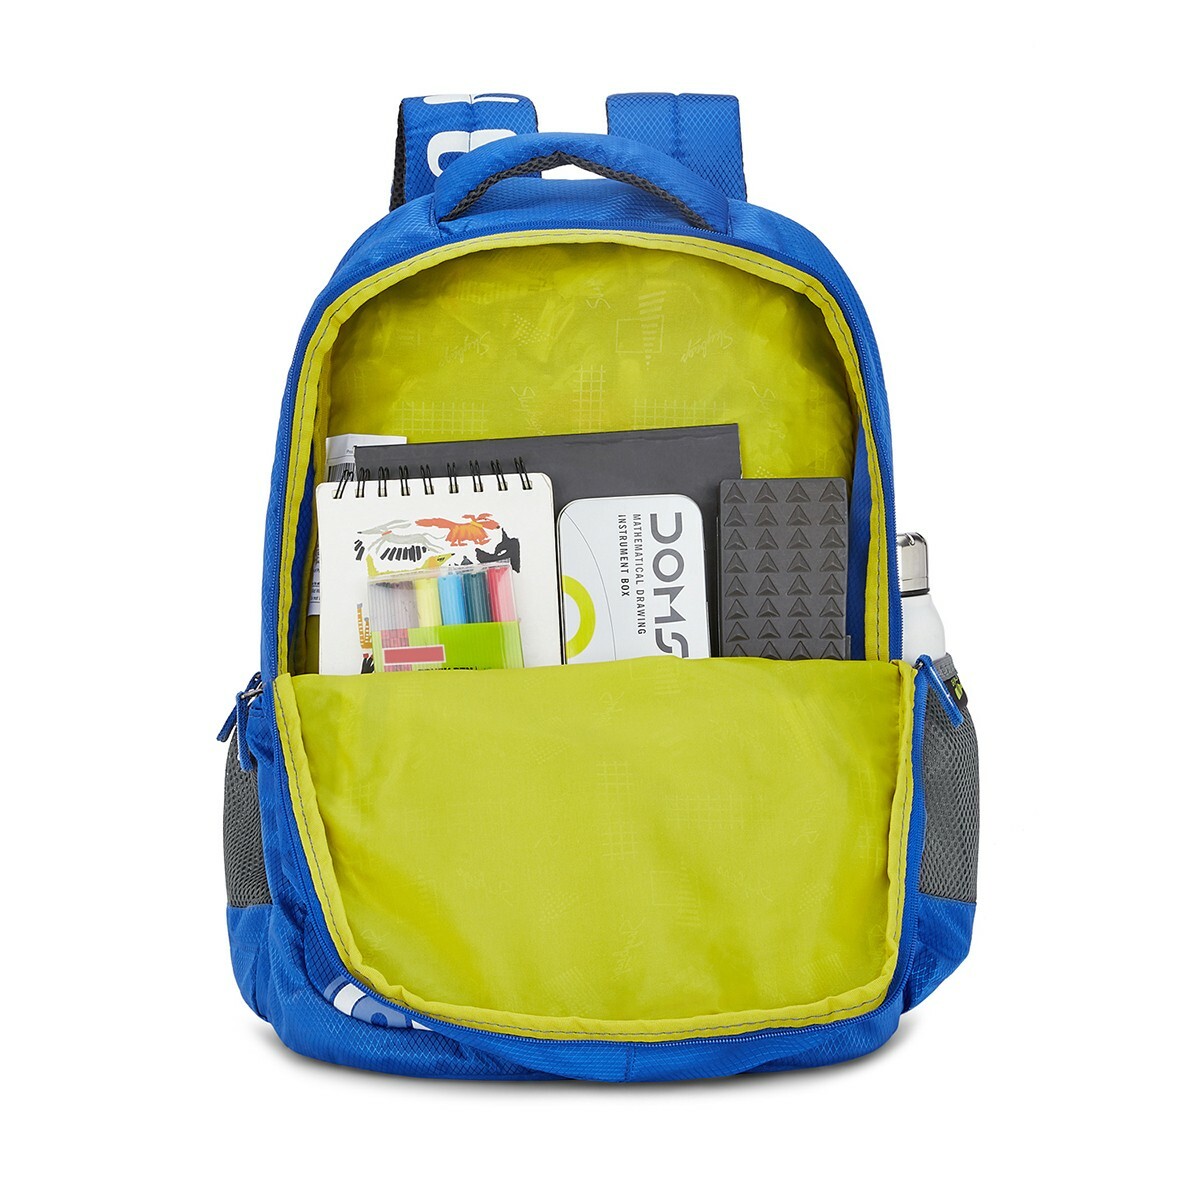 Skybags Backpack New Neon 8 Blue